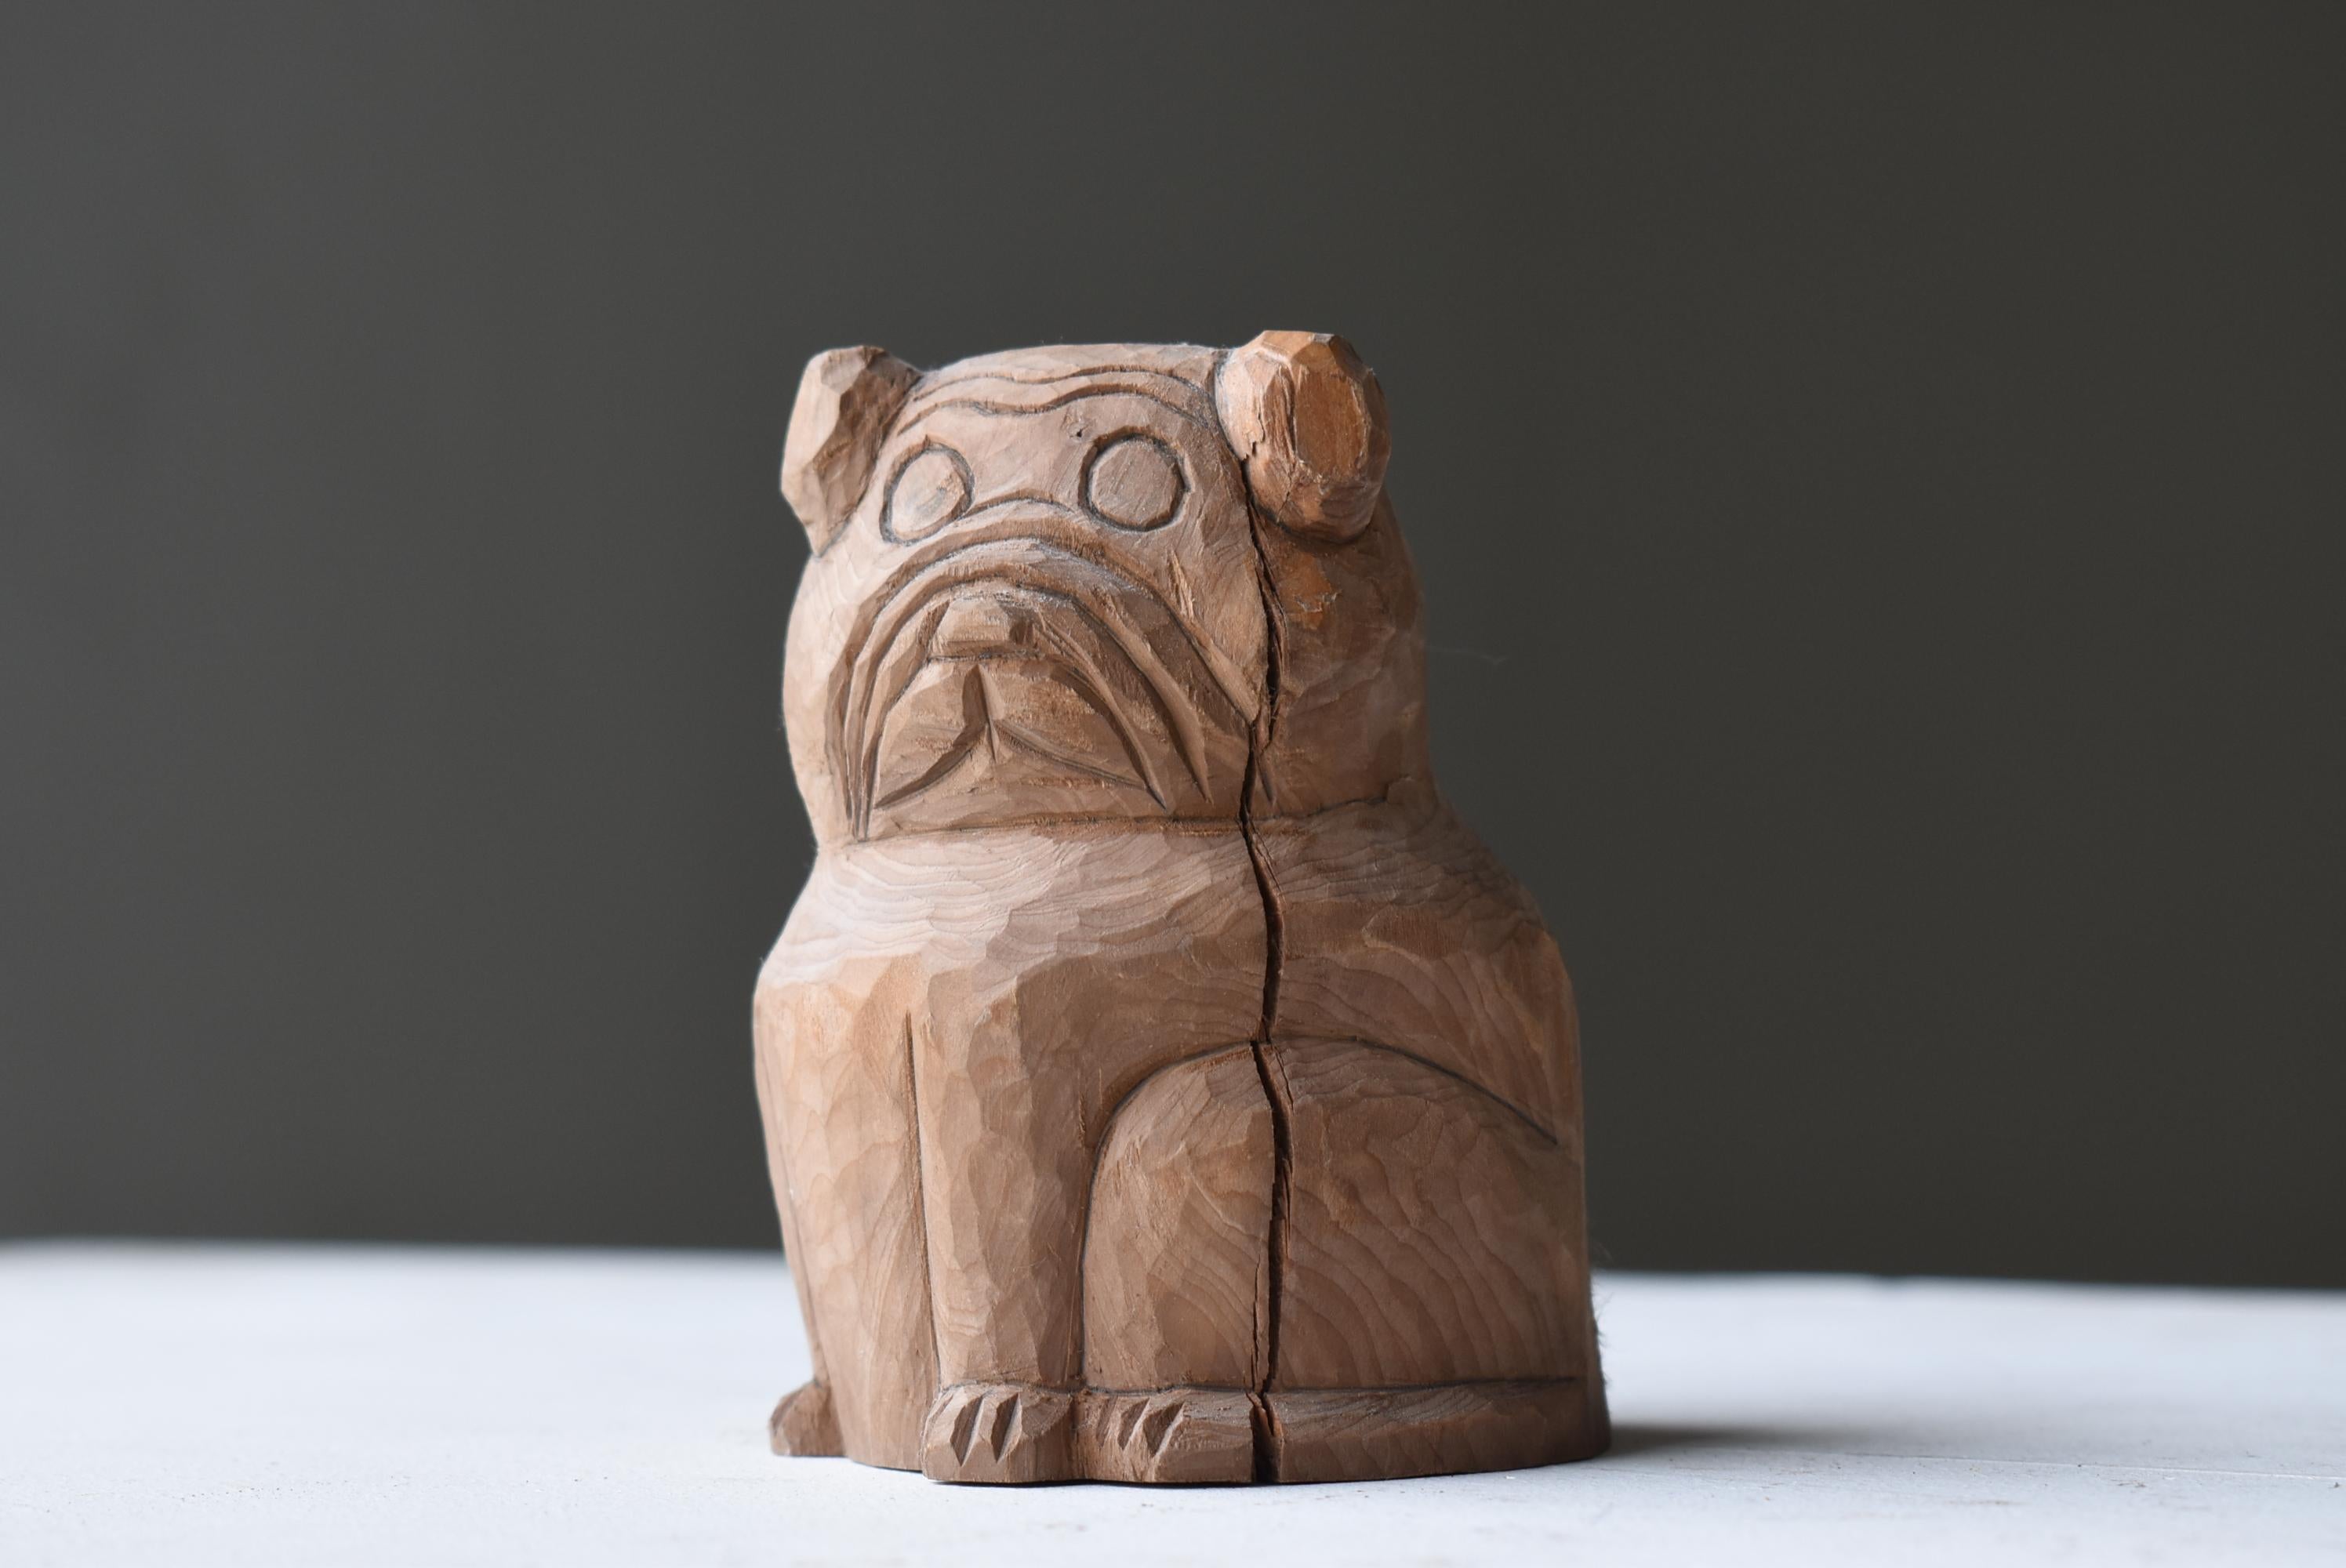 Showa Japanese Old Wood Carving Dog 1940s-1970s / Figurine Sculpture Mingei